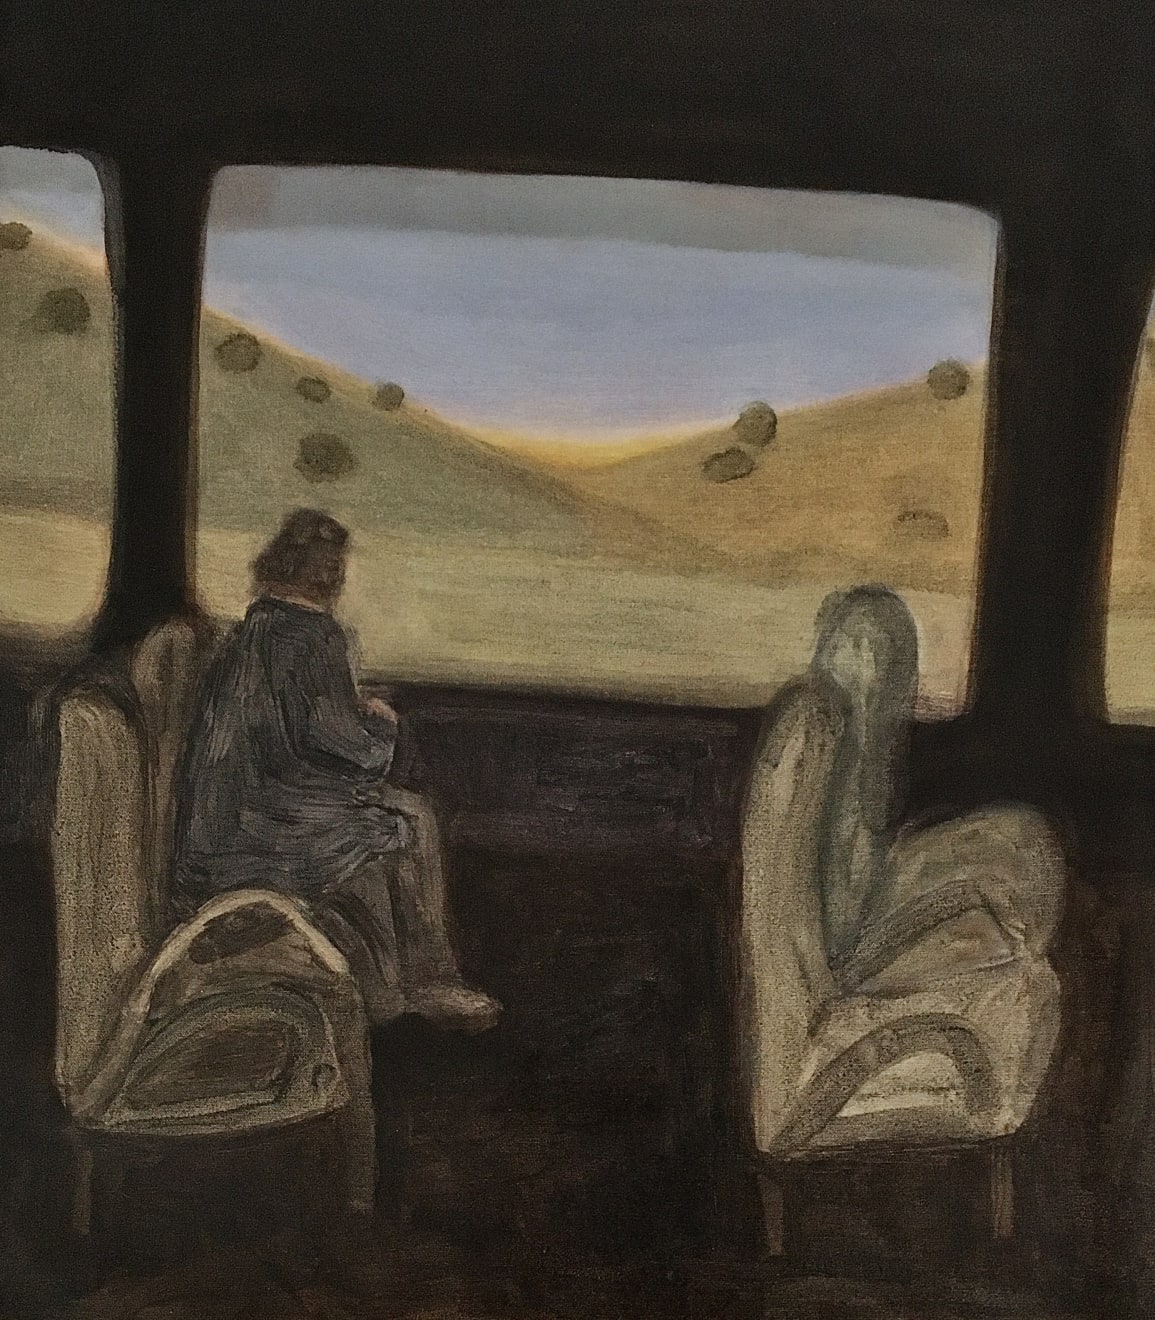 Cinematic Carriage Oil on Canvas Original 60 x 69 cm $1435 £720 SOLD